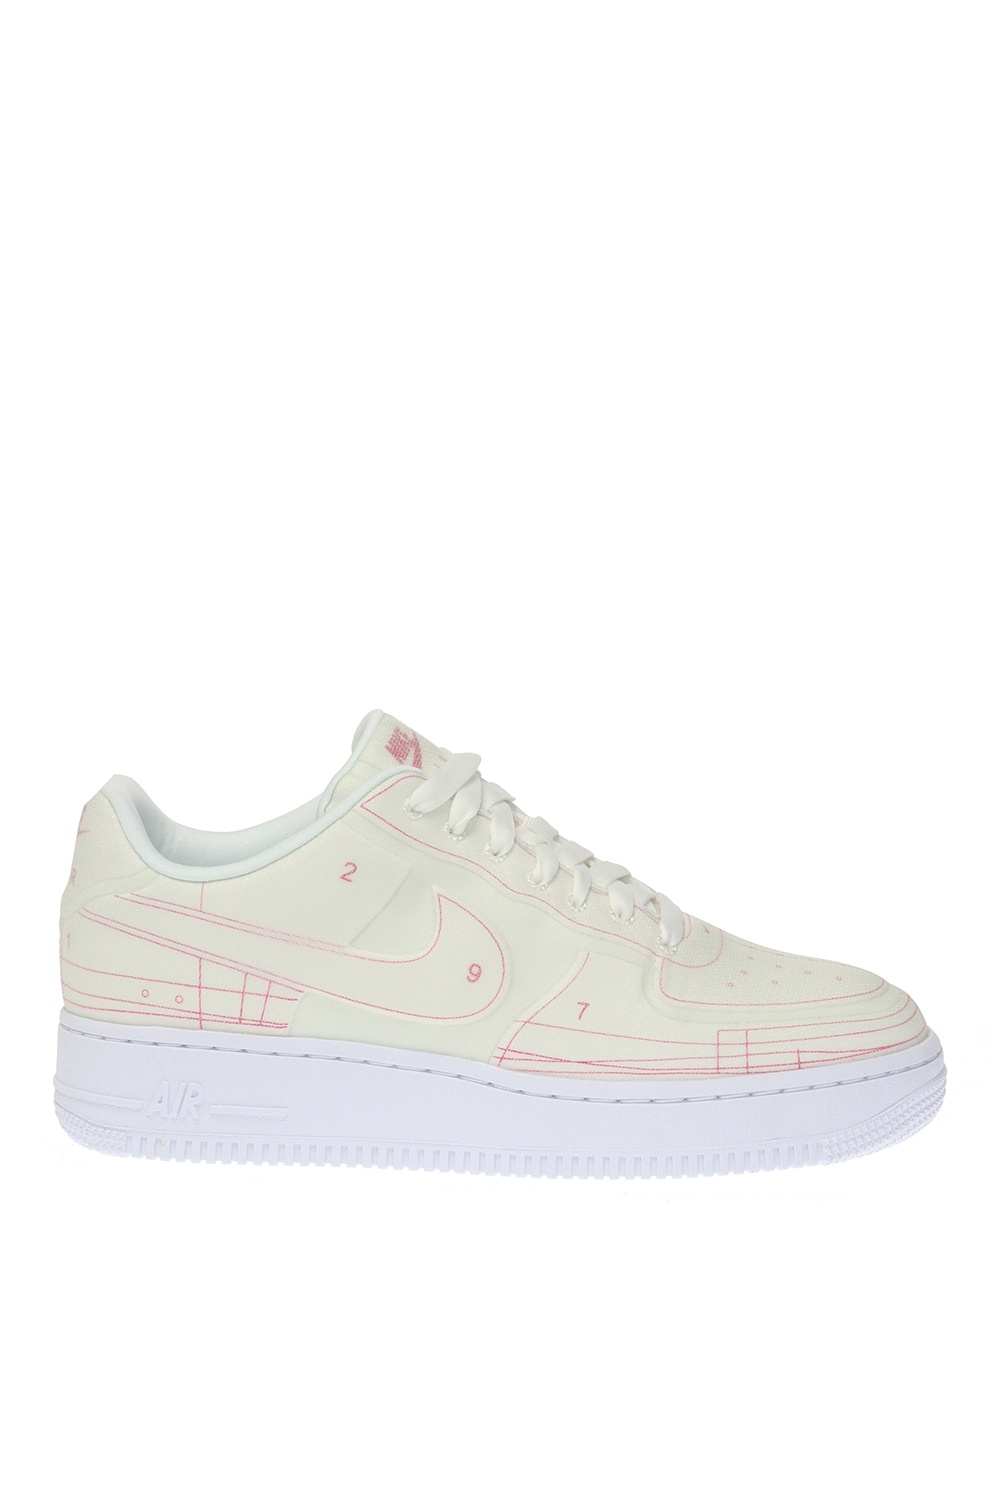 air force 1 07 trainers summit white university red lx f